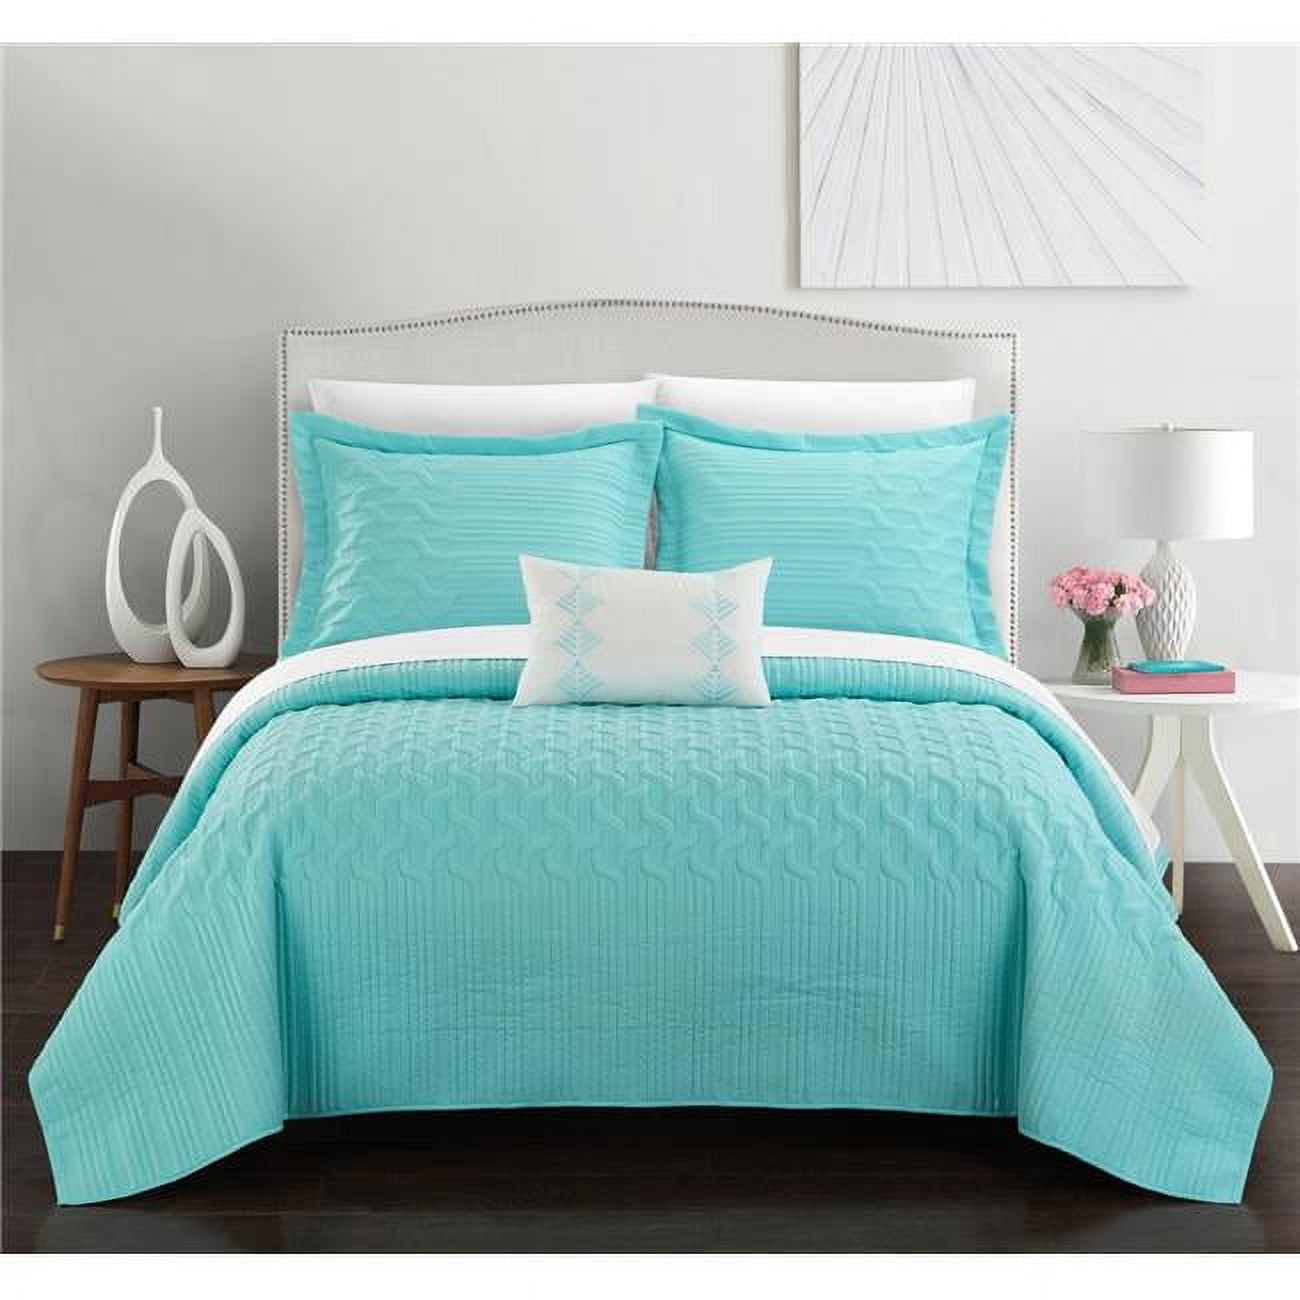 Bqs10605-bib-us Queen Size Shaela Interlaced Vine Pattern Quilted Bed In A Bag Cover Sheet Set, Aqua - 8 Piece